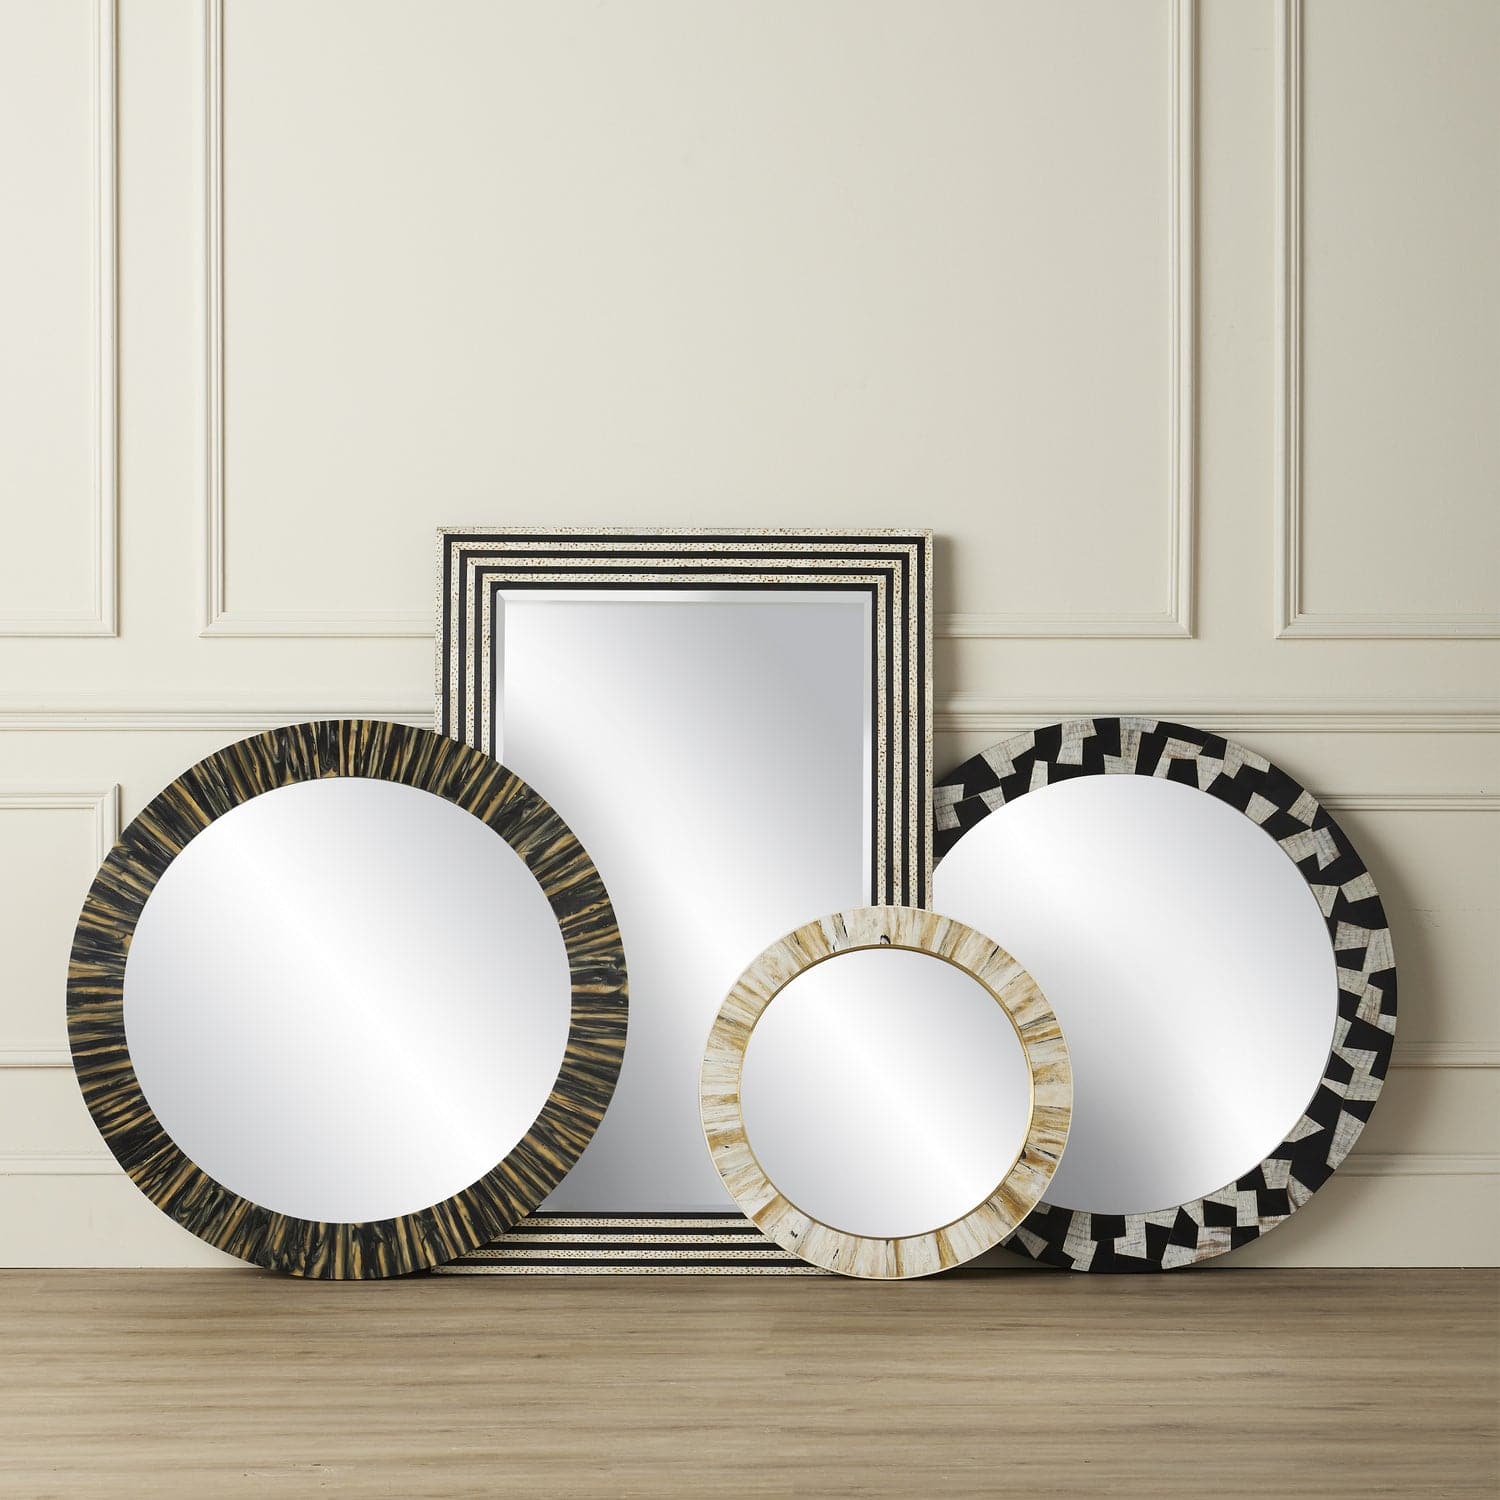 Mirror from the Bindu collection in Black/Natural/Mirror finish